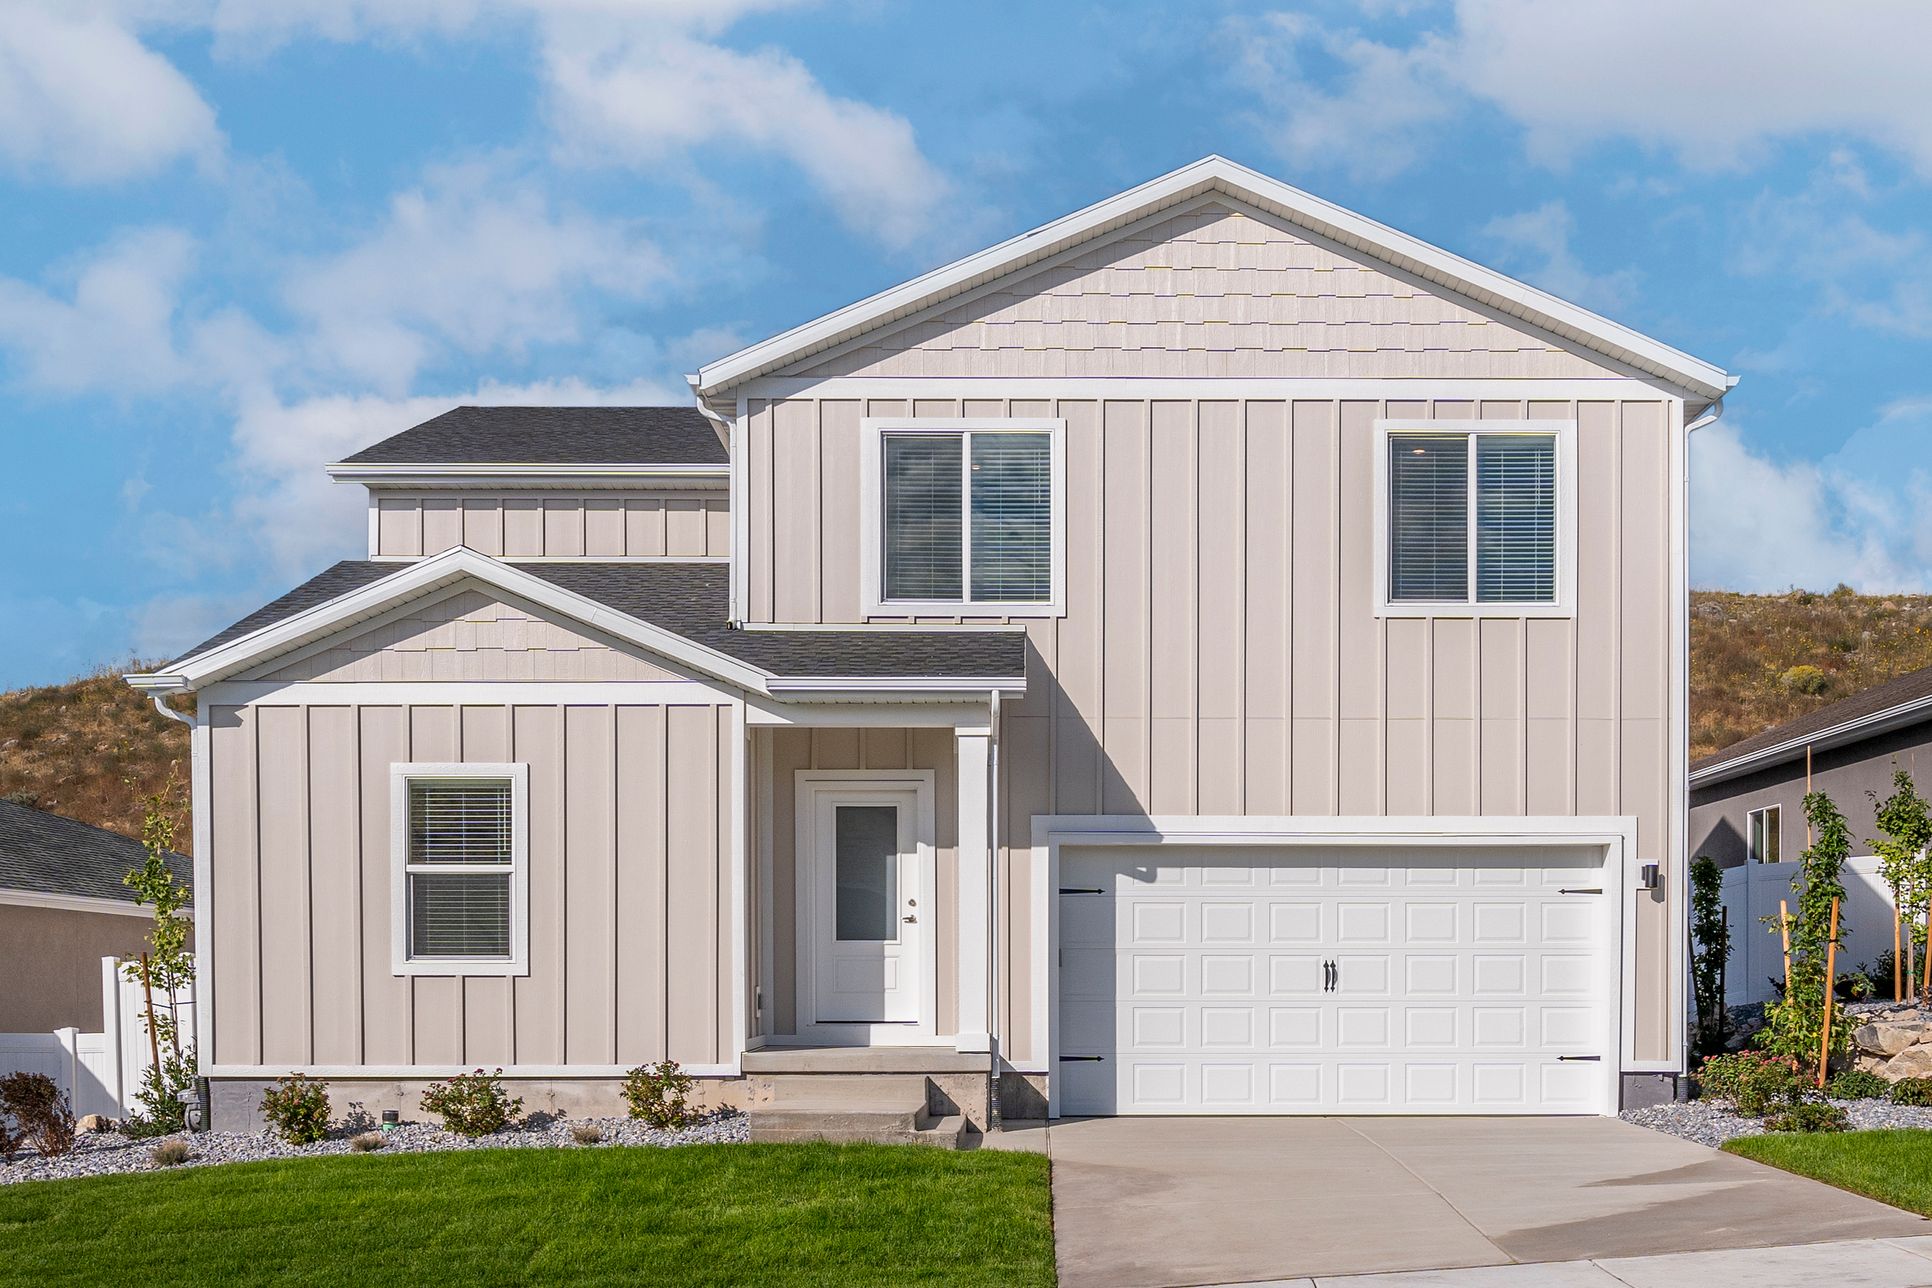 The Thurston by LGI Homes:The Thurston is a beautiful two-story home.